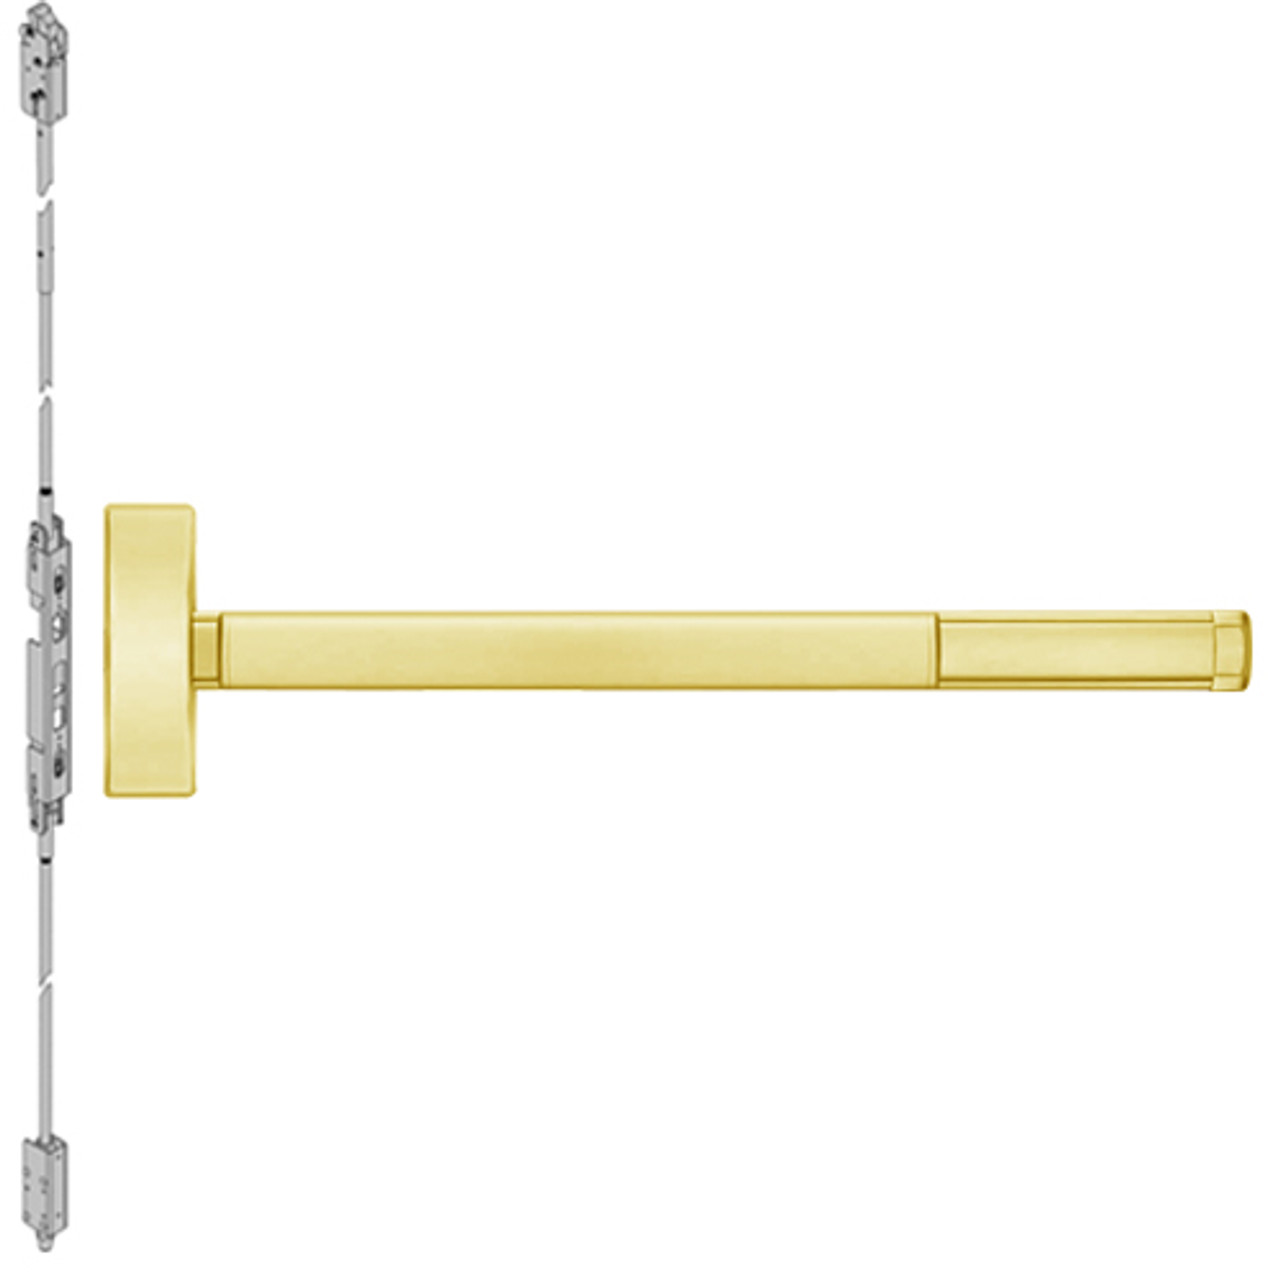 FL2805-605-36 PHI 2800 Series Fire Rated Concealed Vertical Rod Exit Device Prepped for Key Controls Thumb Piece in Bright Brass Finish